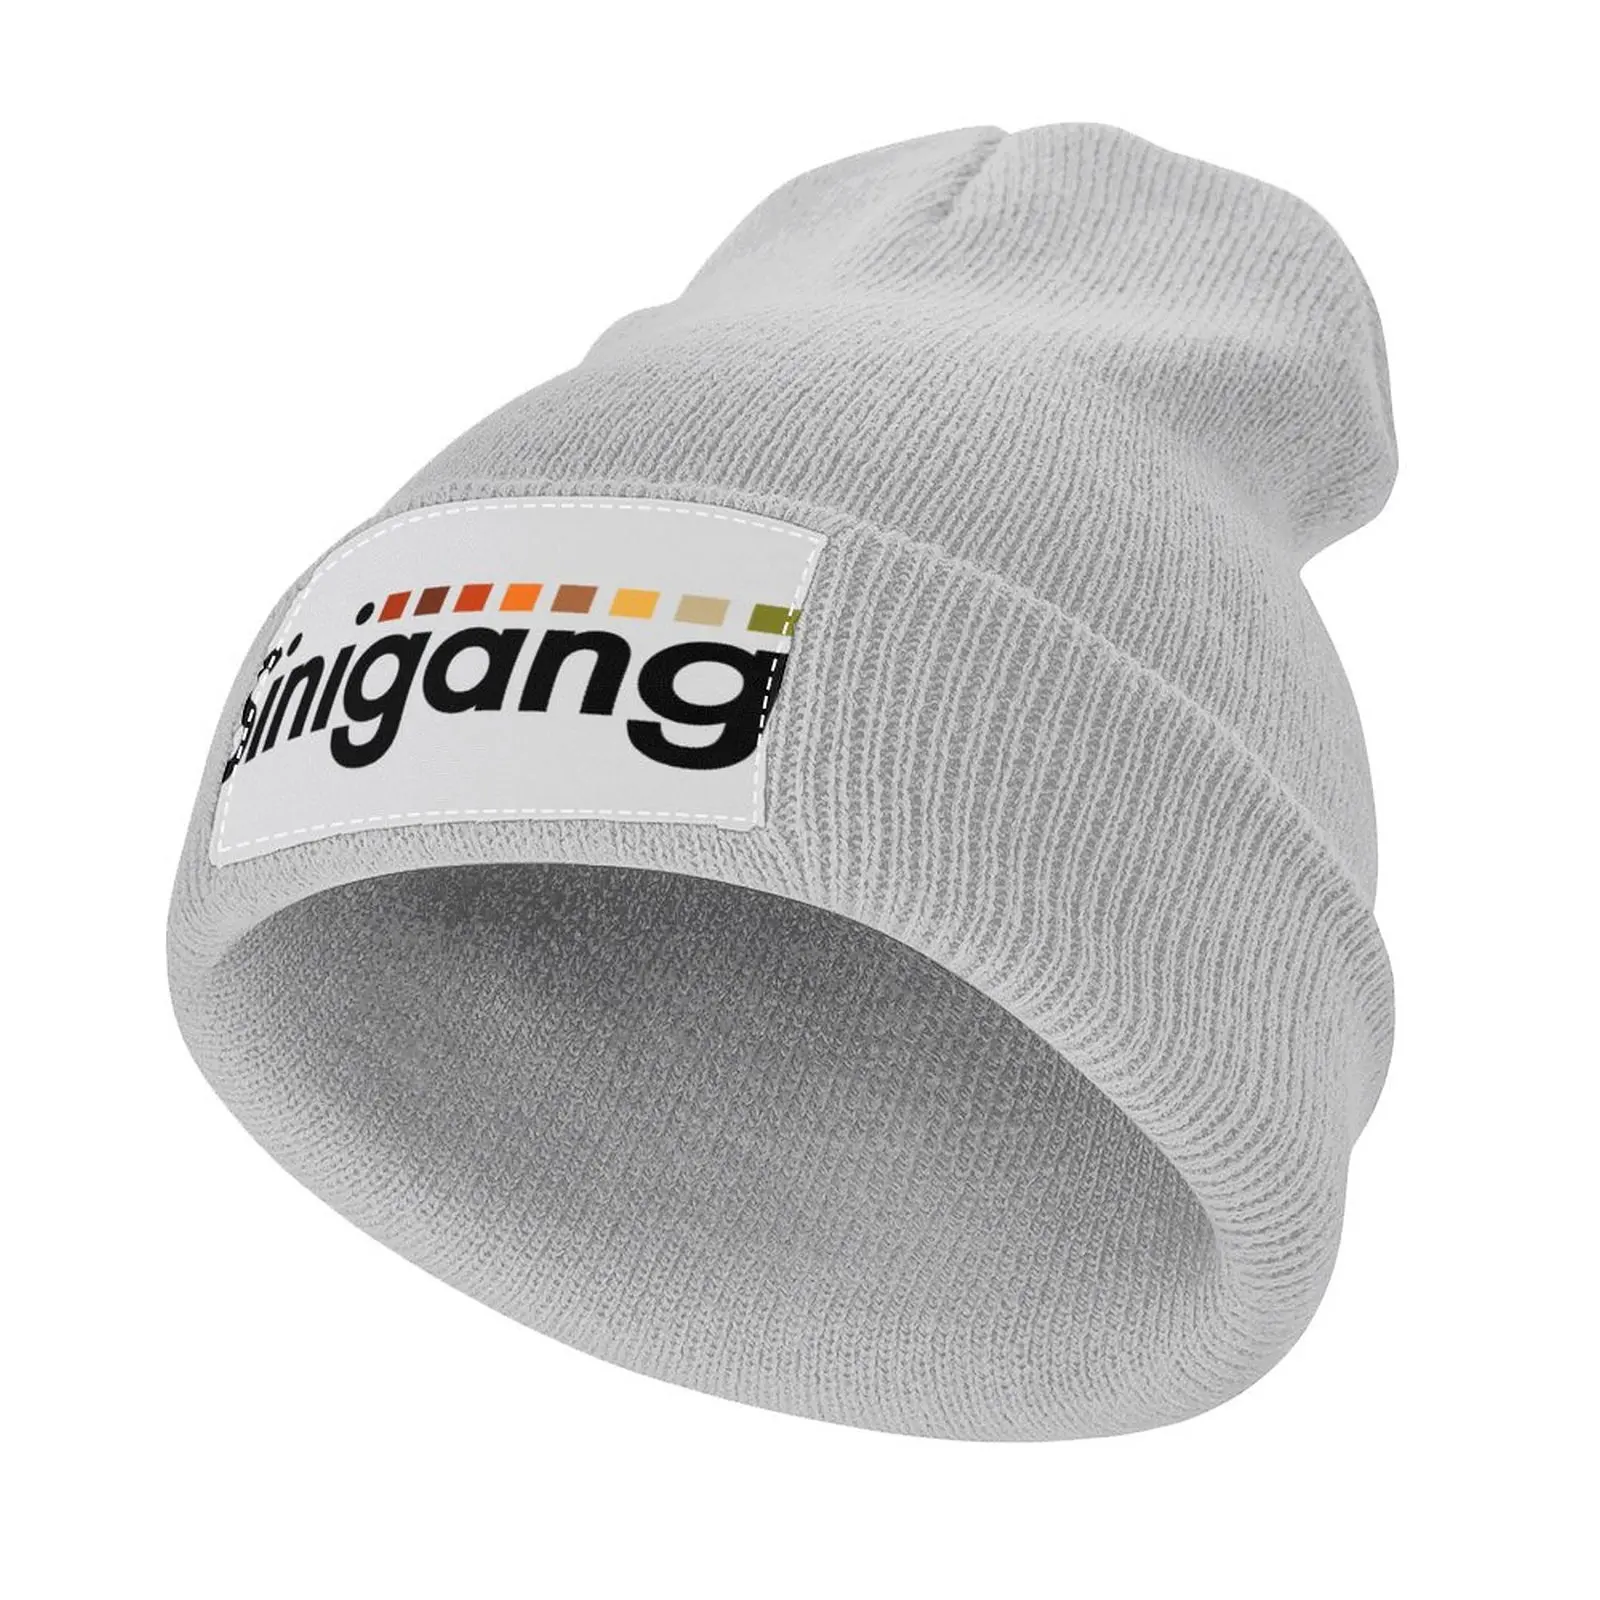 

SINIGANG FILIPINO FOOD COLORS Knitted Hat cute Dropshipping Snap Back Hat New In The Hat Cap For Women Men's